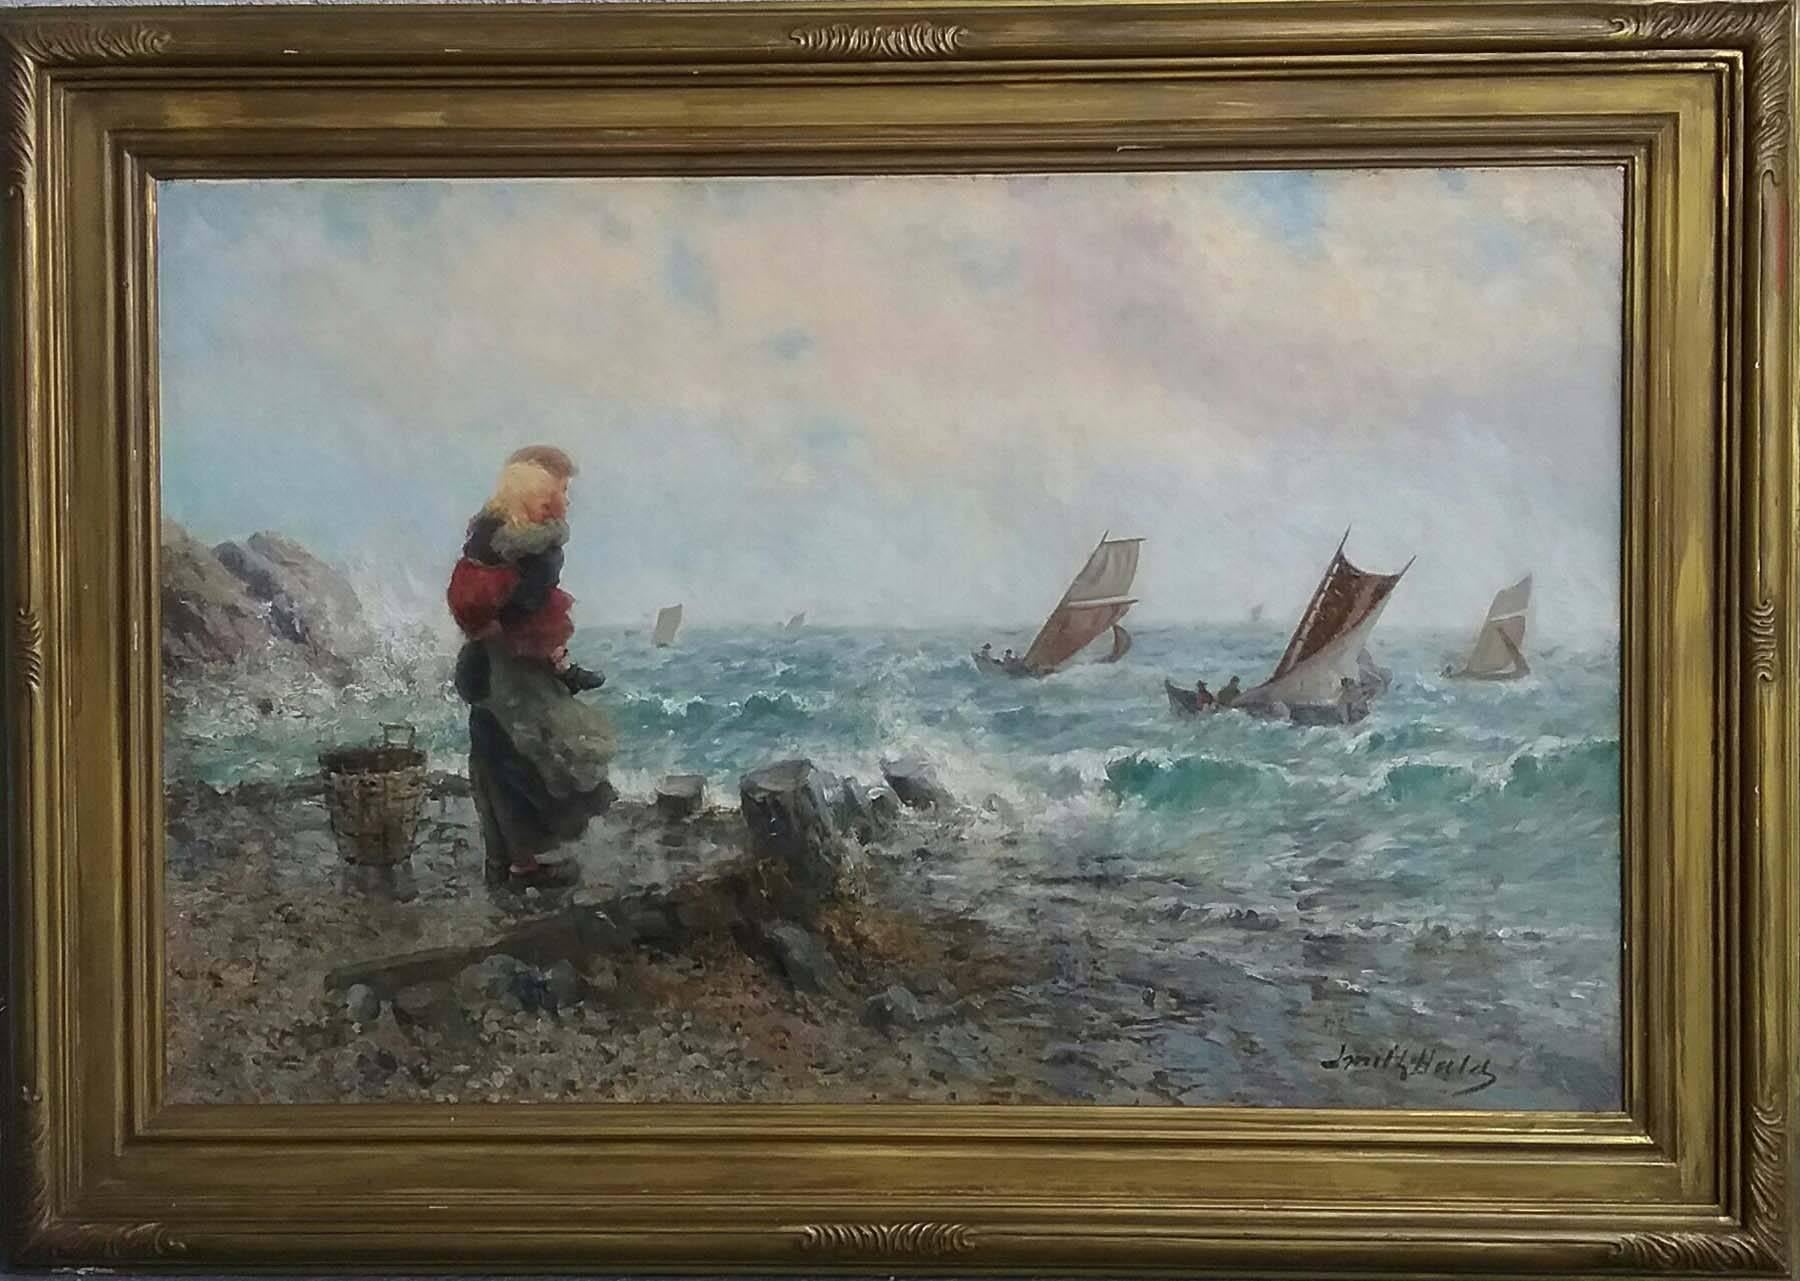 LOOKING OUT TO SEA - Painting by Fridjof Smith Hald